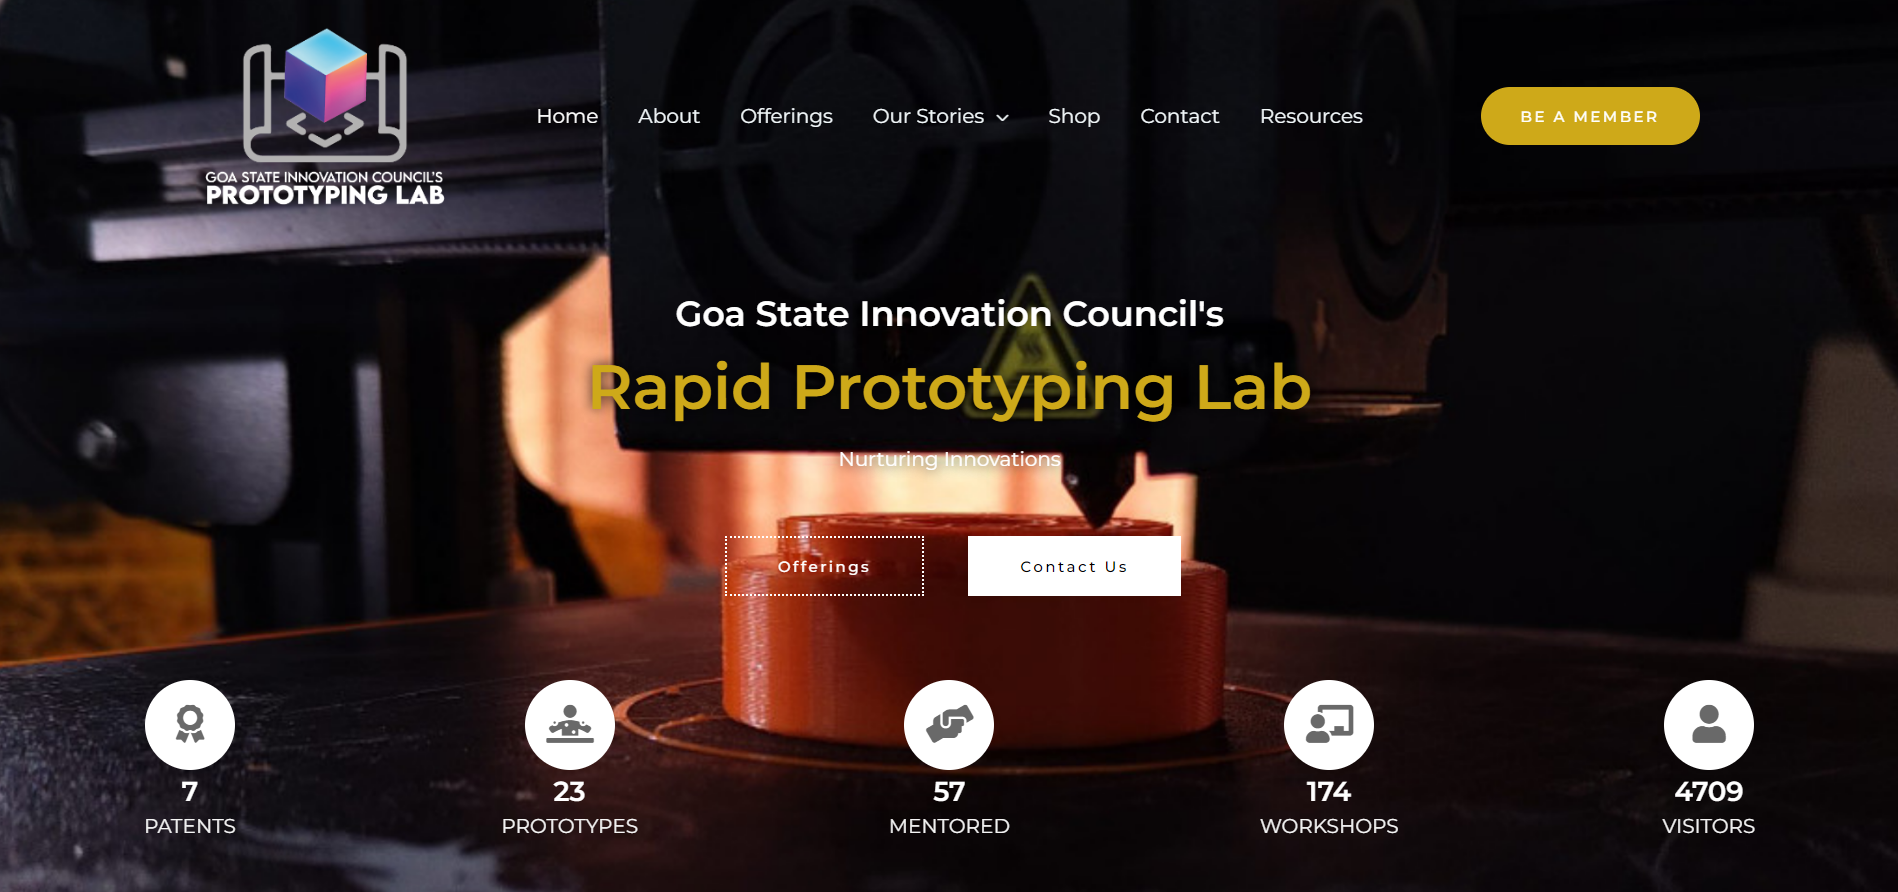 RAPID PROTOTYPING LAB BY GOA STATE INNOVATION COUNCIL